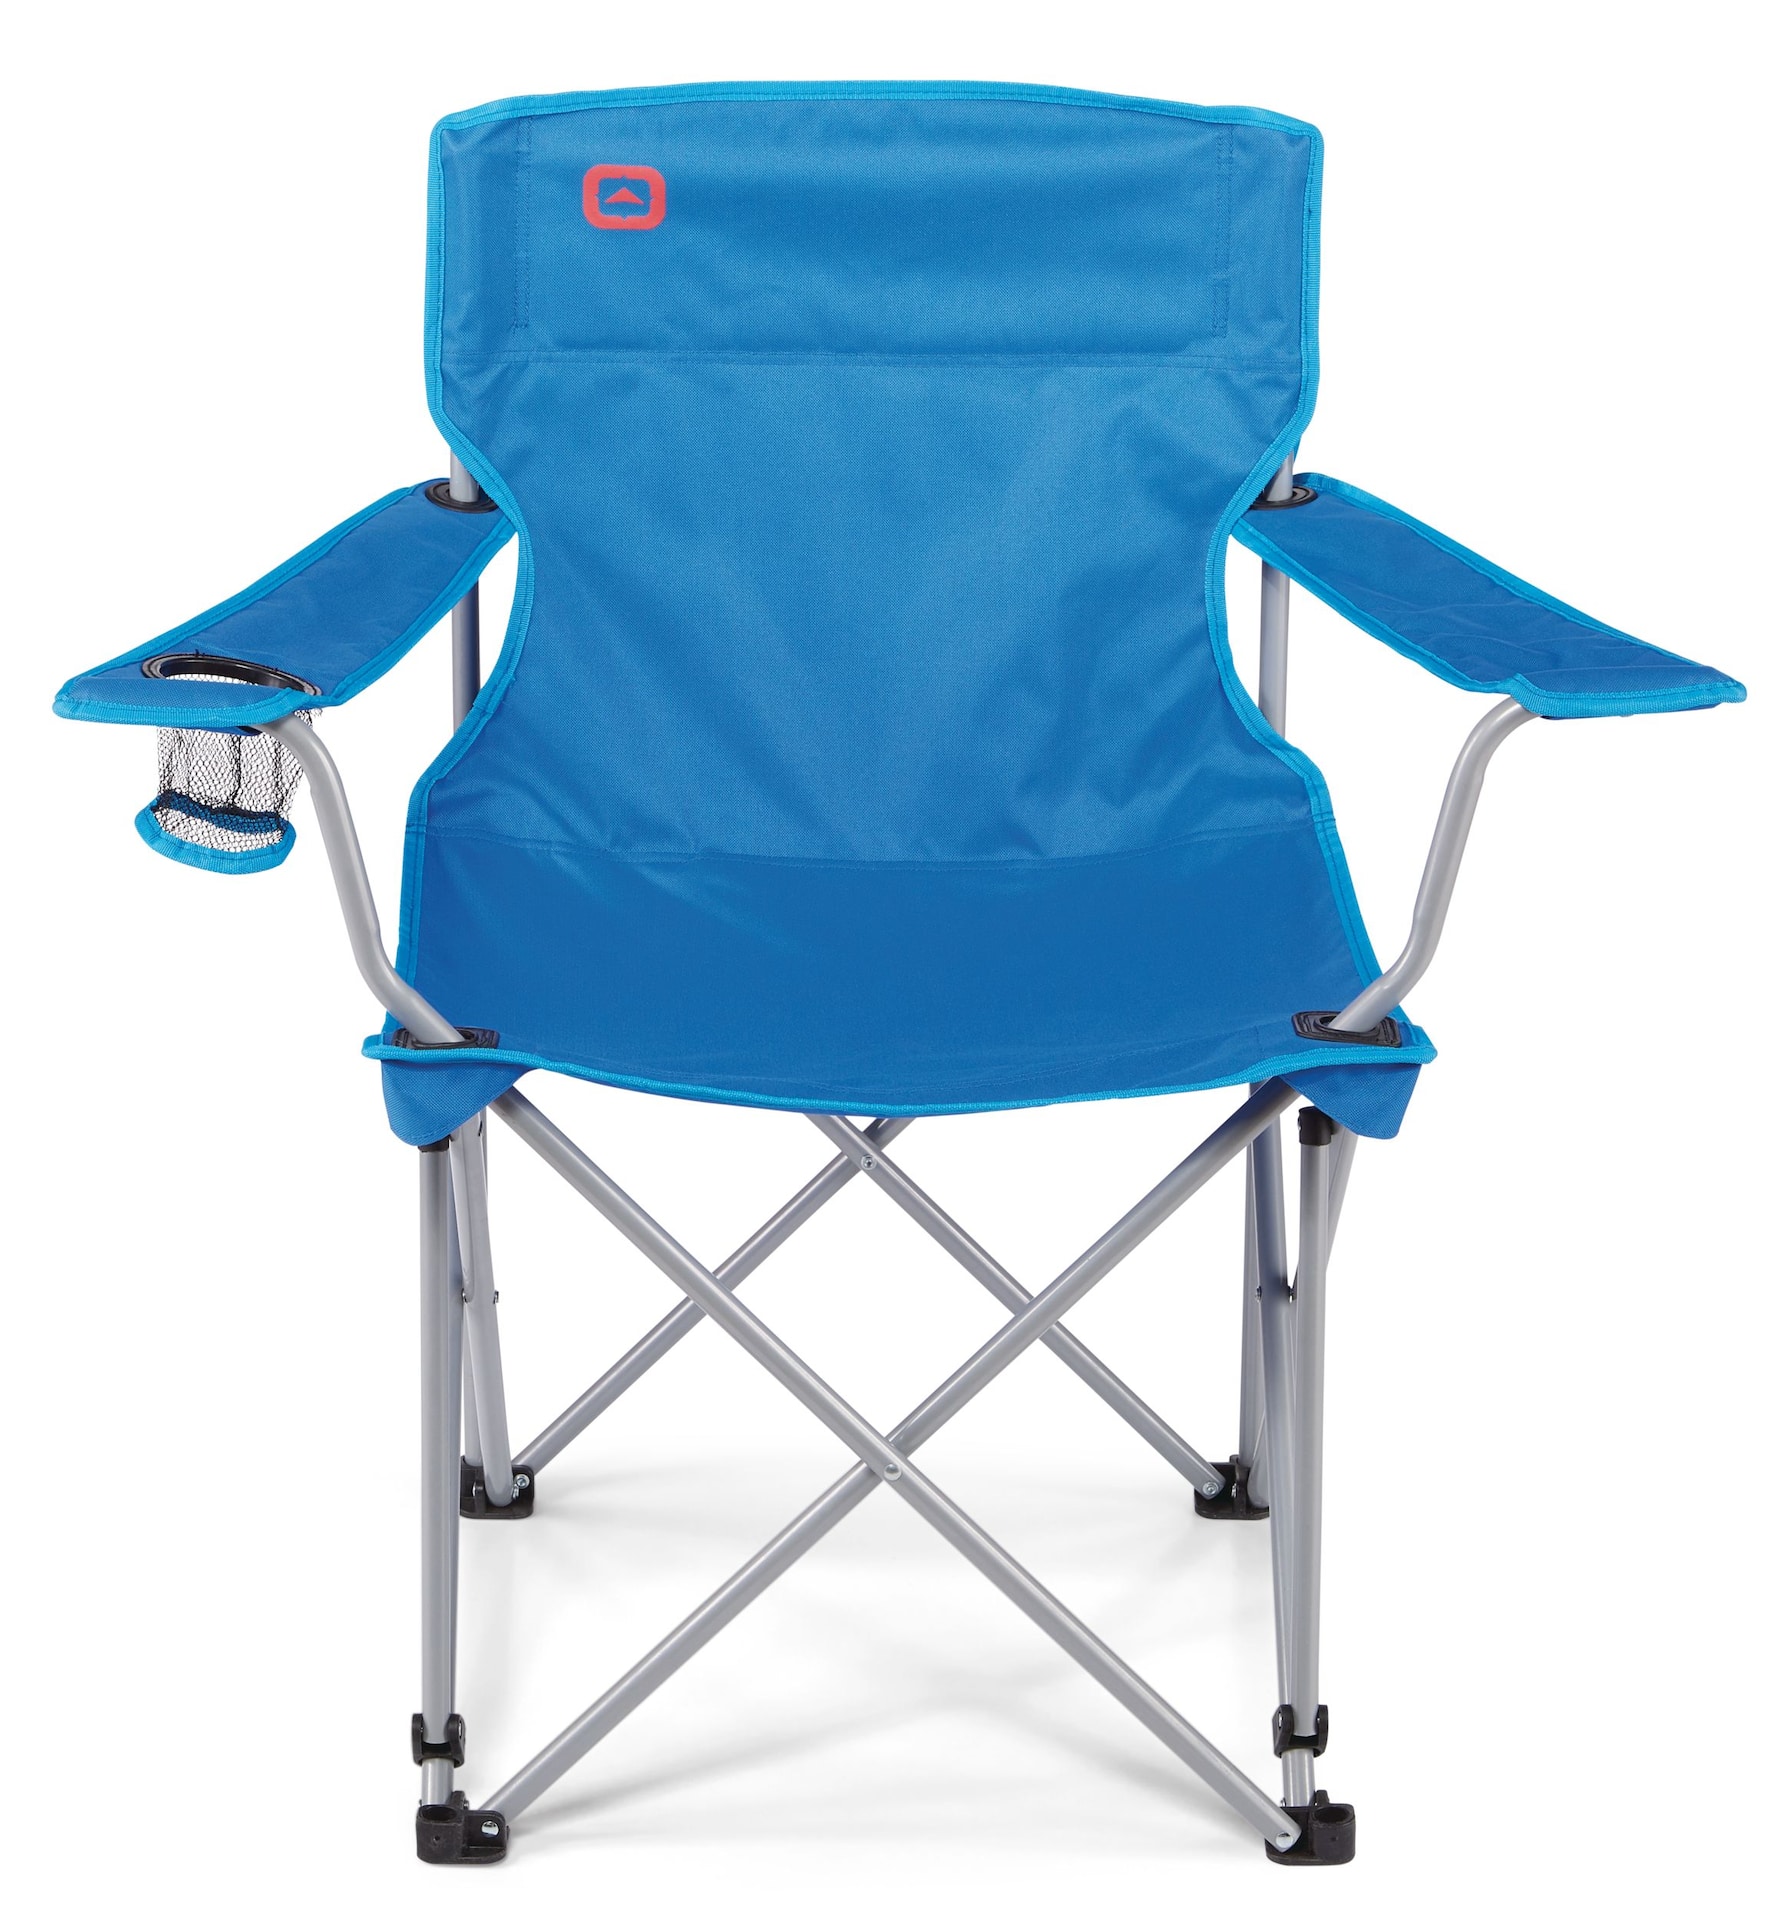 Outbound Premium Oversized Portable Folding Camping Quad Chair w/ Cup  Holder